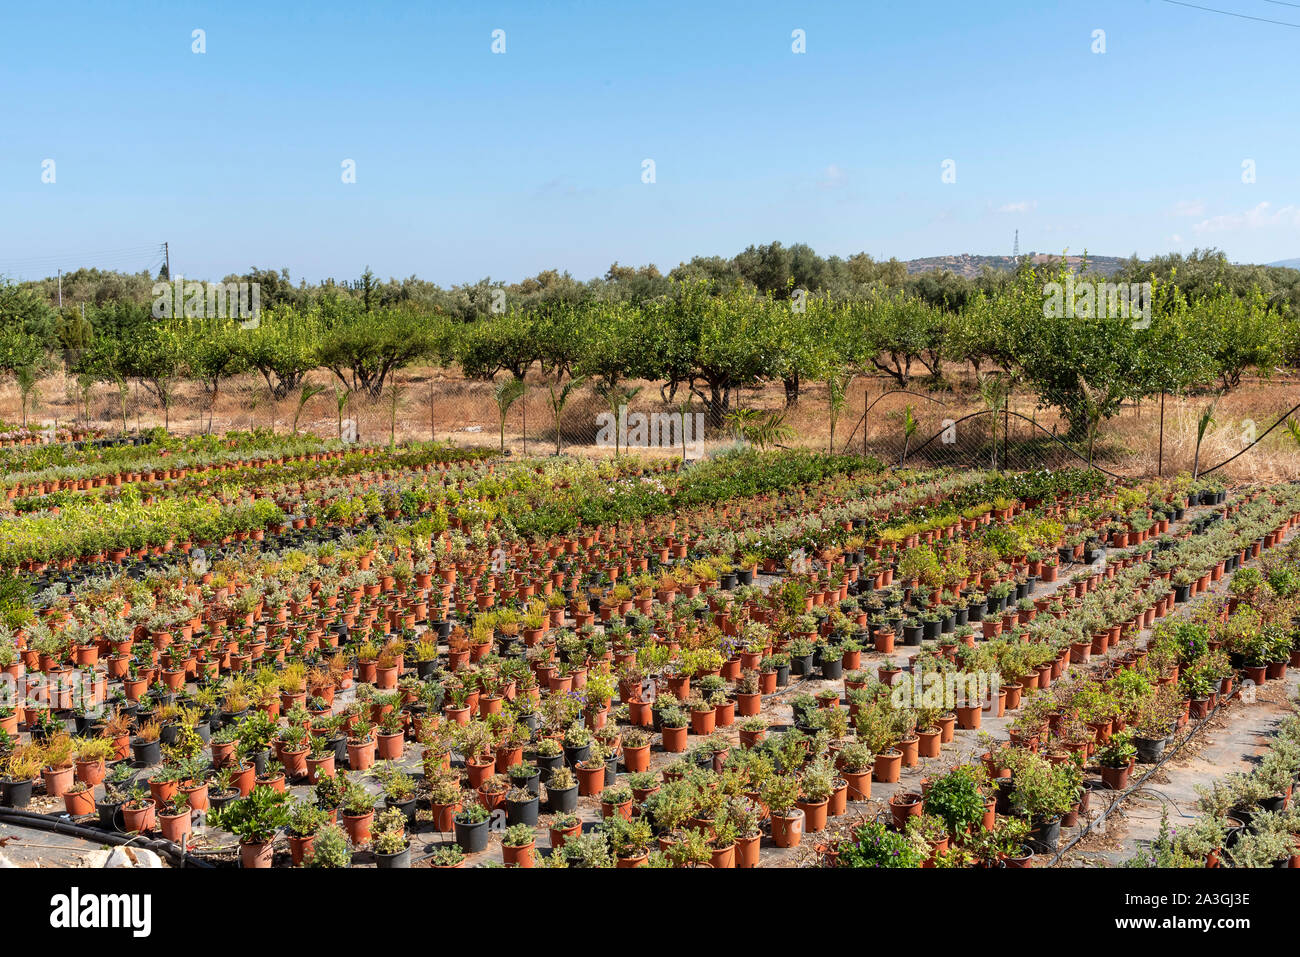 Malia, Crete, Greece. September 2019. Potted plants growing outdoors on  a commercial scale for selling to garden centres. Stock Photo